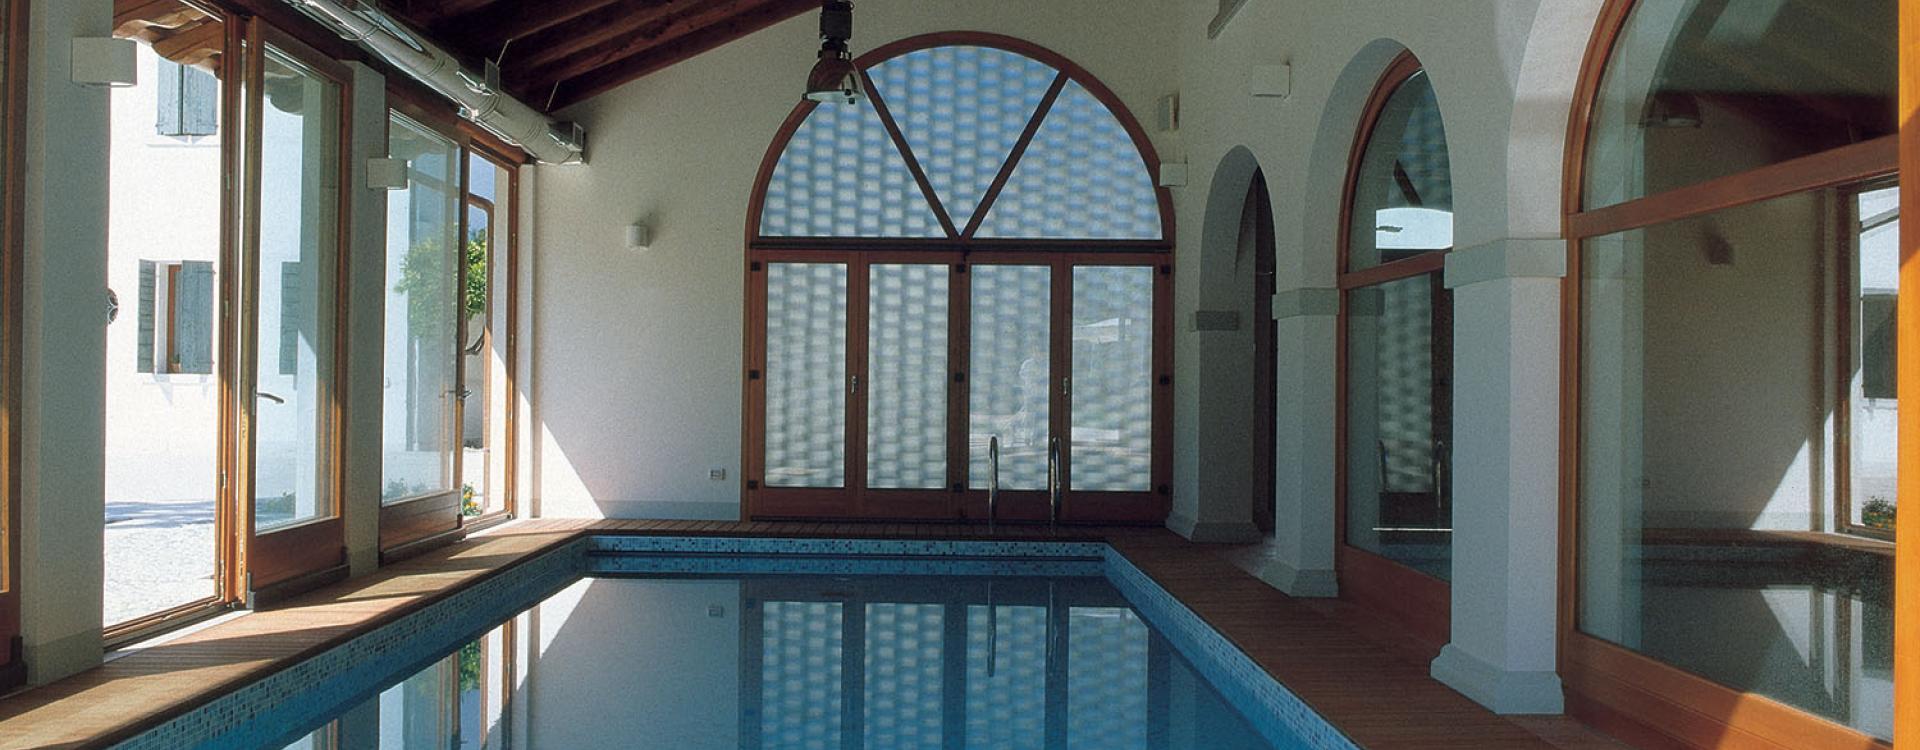 swimming pool tiles from Oderzo, Private House Treviso, Italy